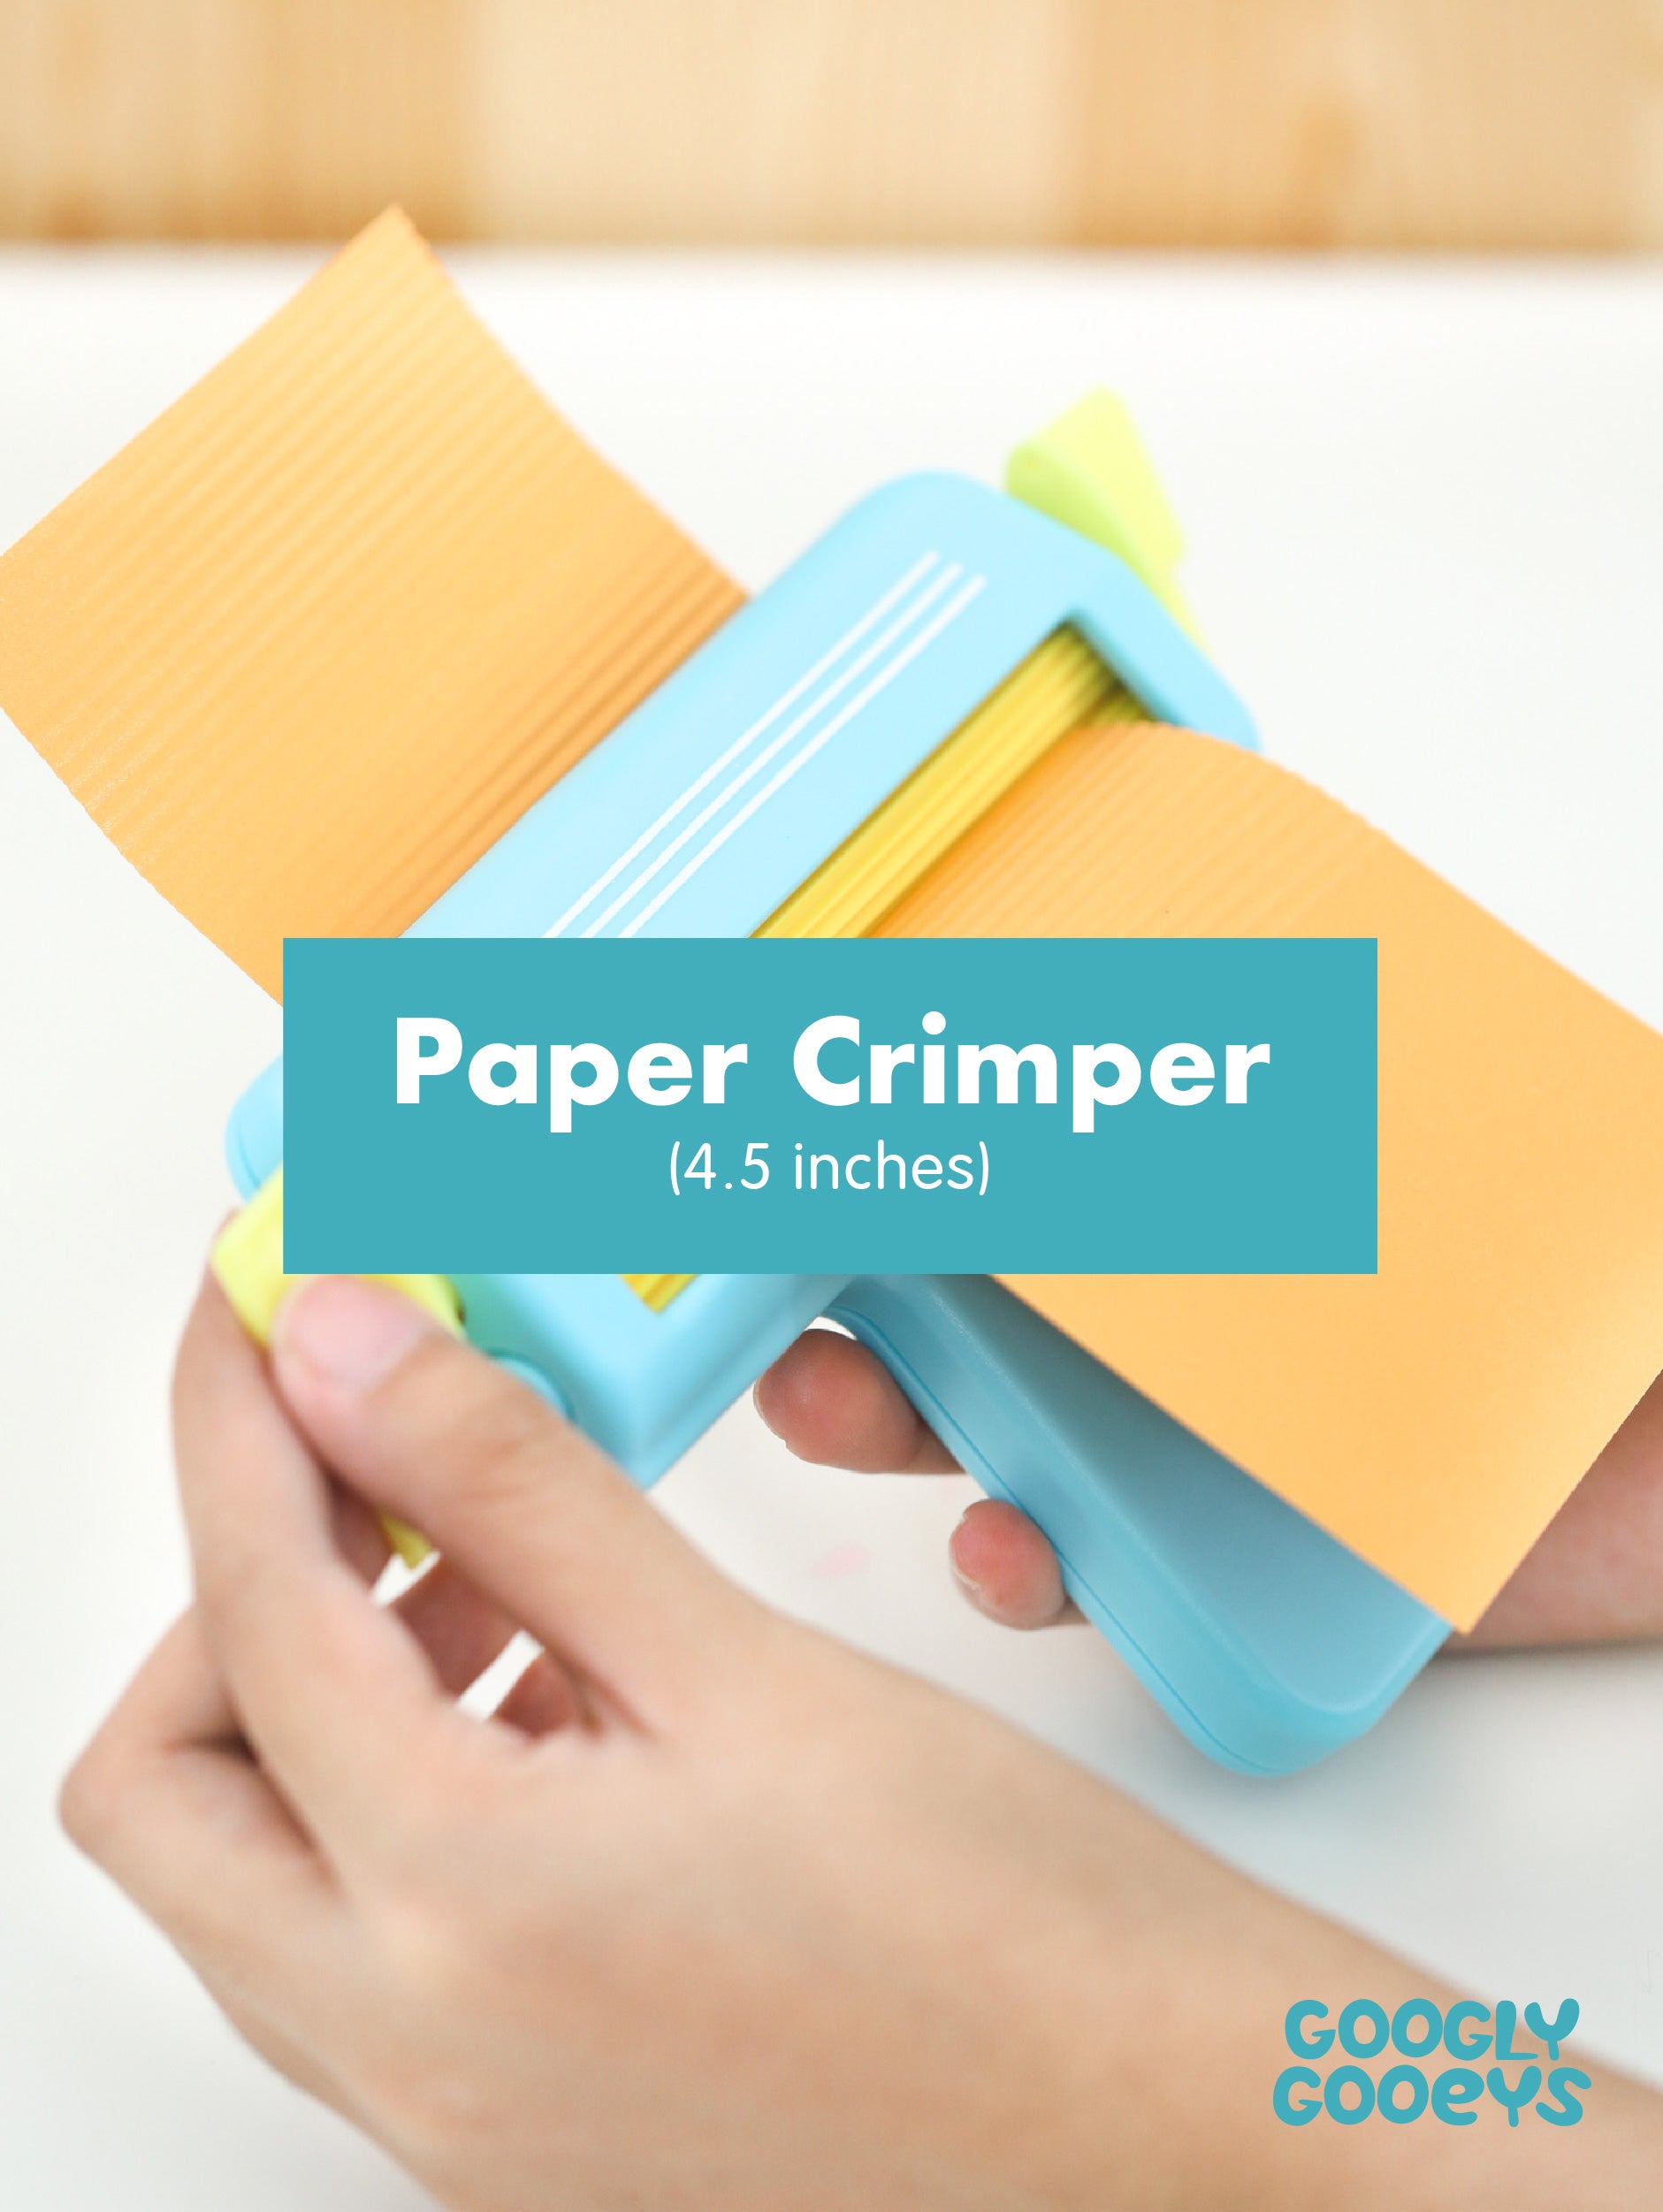 Replying to @nicoleboheler Paper Crimper from  #chipbags #southt, Handmade Bag